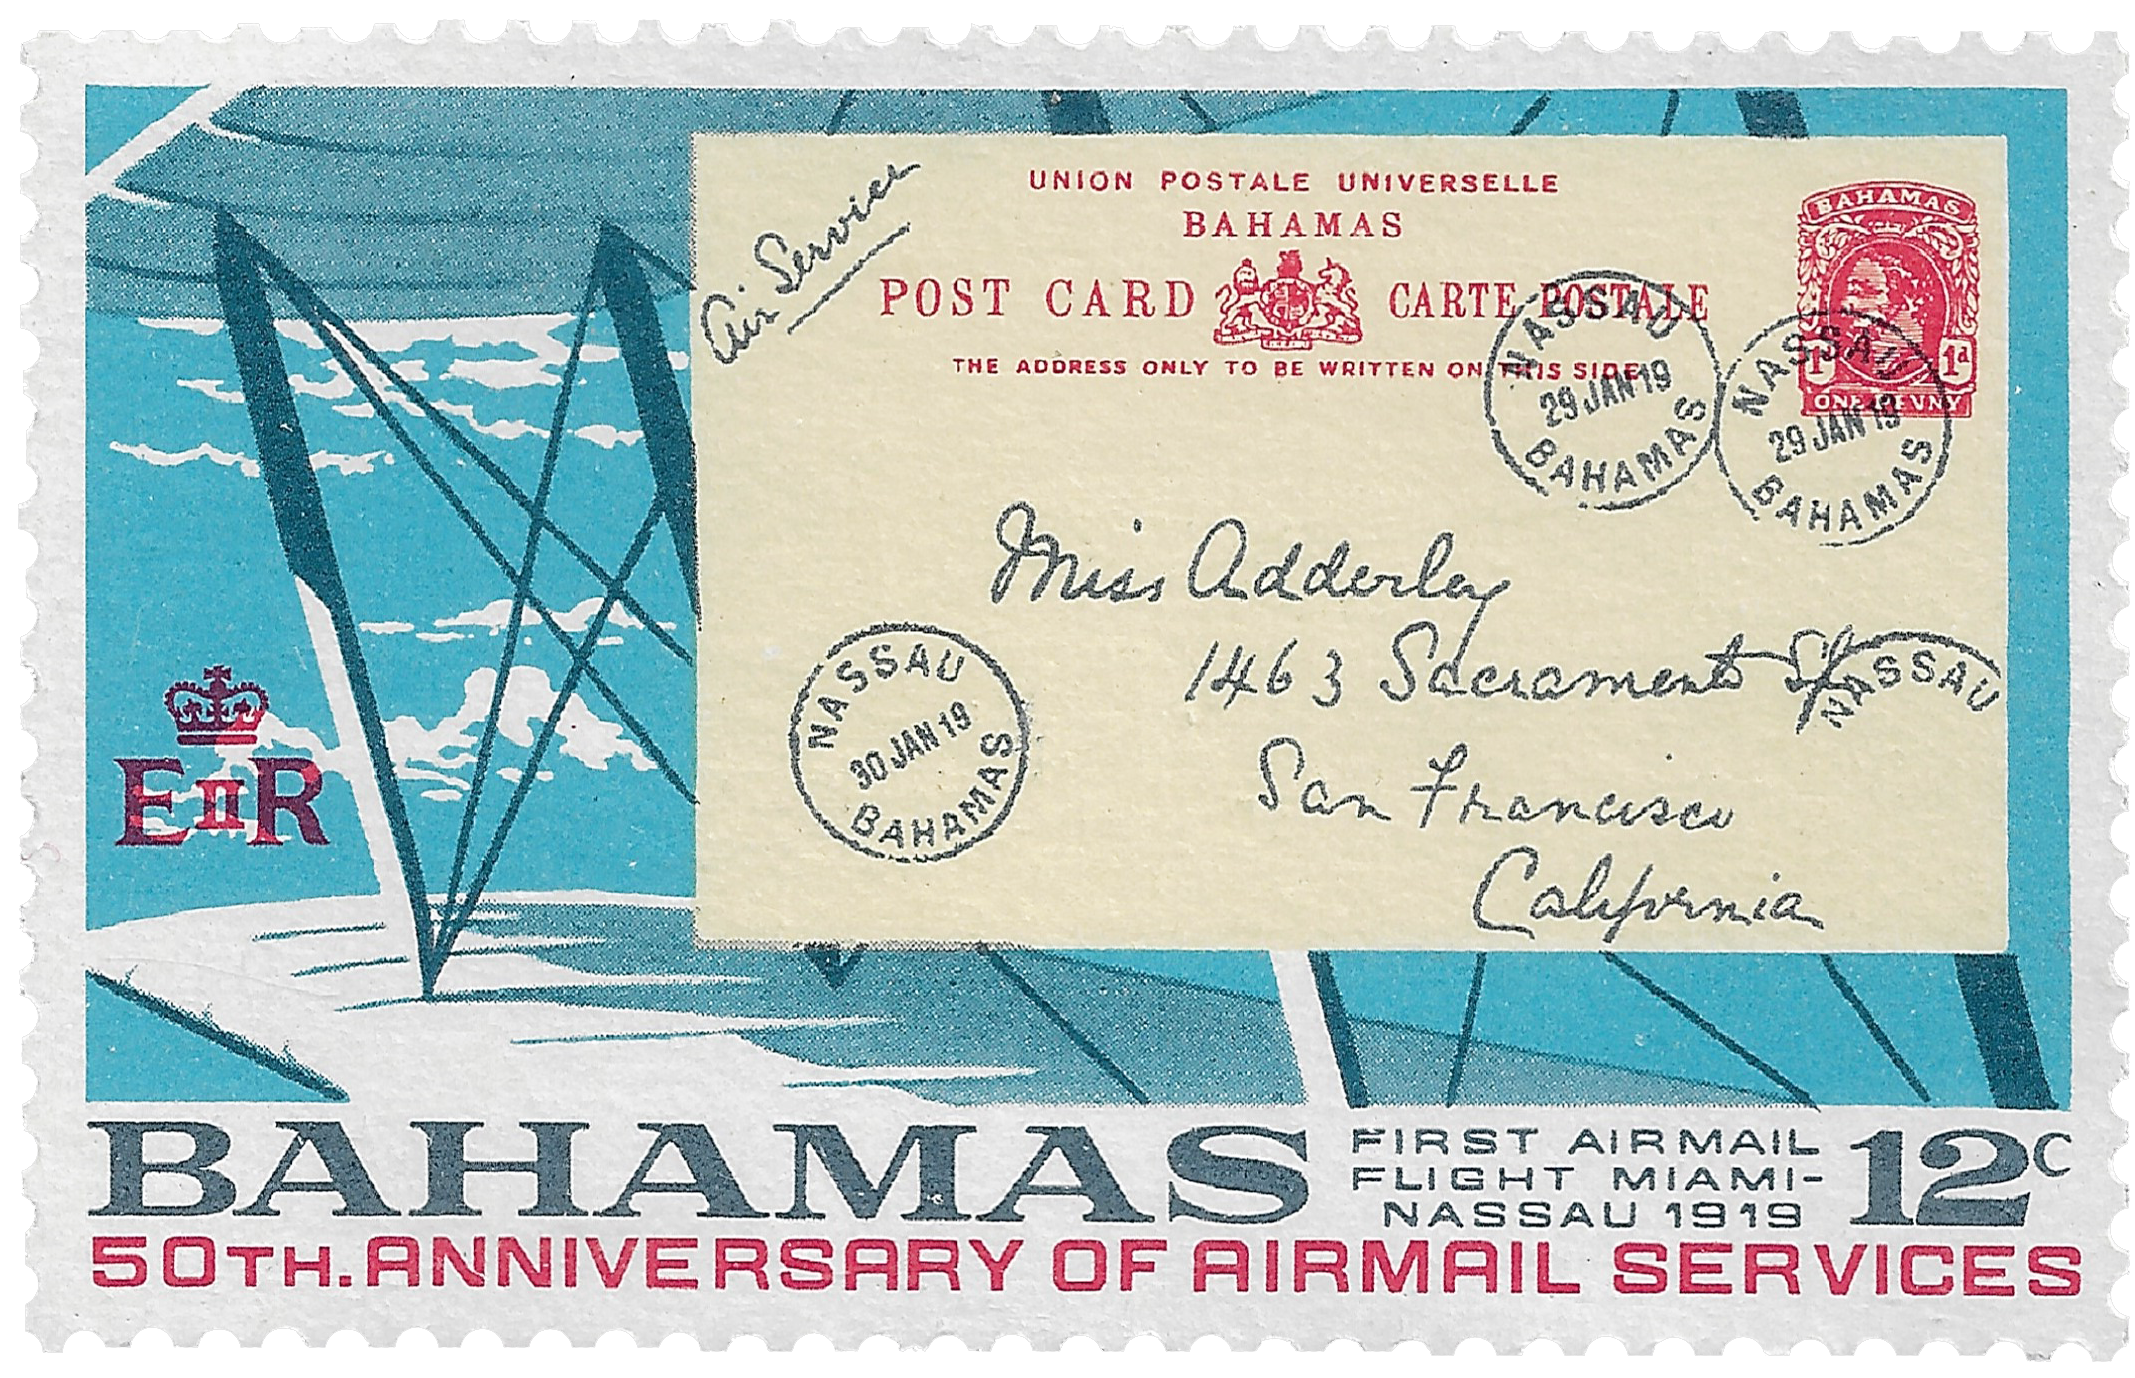 12c 1969, 50th Anniversary of Airmail Services